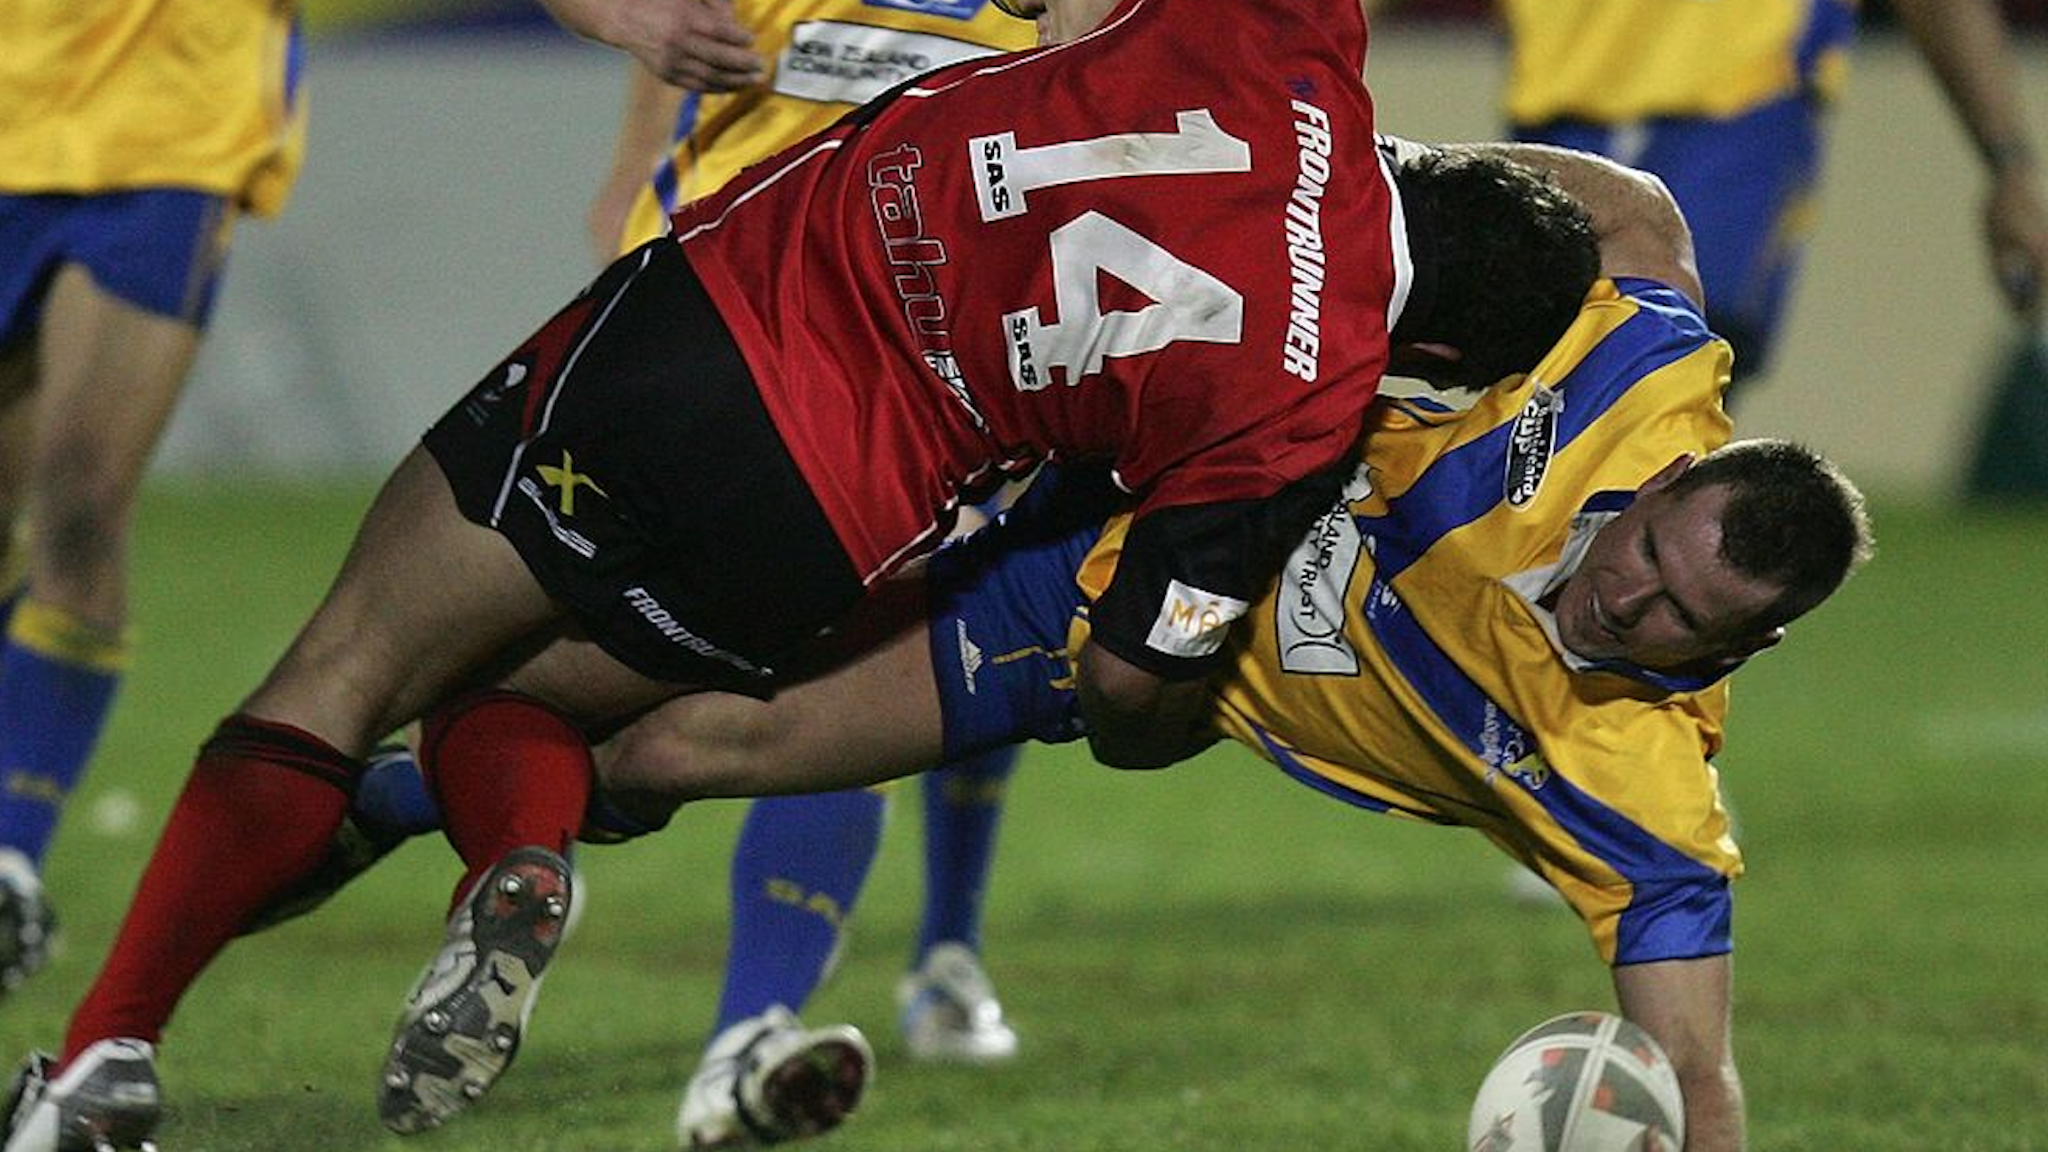 Rowan Baxter of the Lions tackled by Clinton Fraser (L) during the NZRL National Premiership Bartercard Cup Grand Final league match between the Auckland Lions and Canterbury Bulls played at Mount Smart Stadium on September 18, 2006 in Auckland New Zealand.